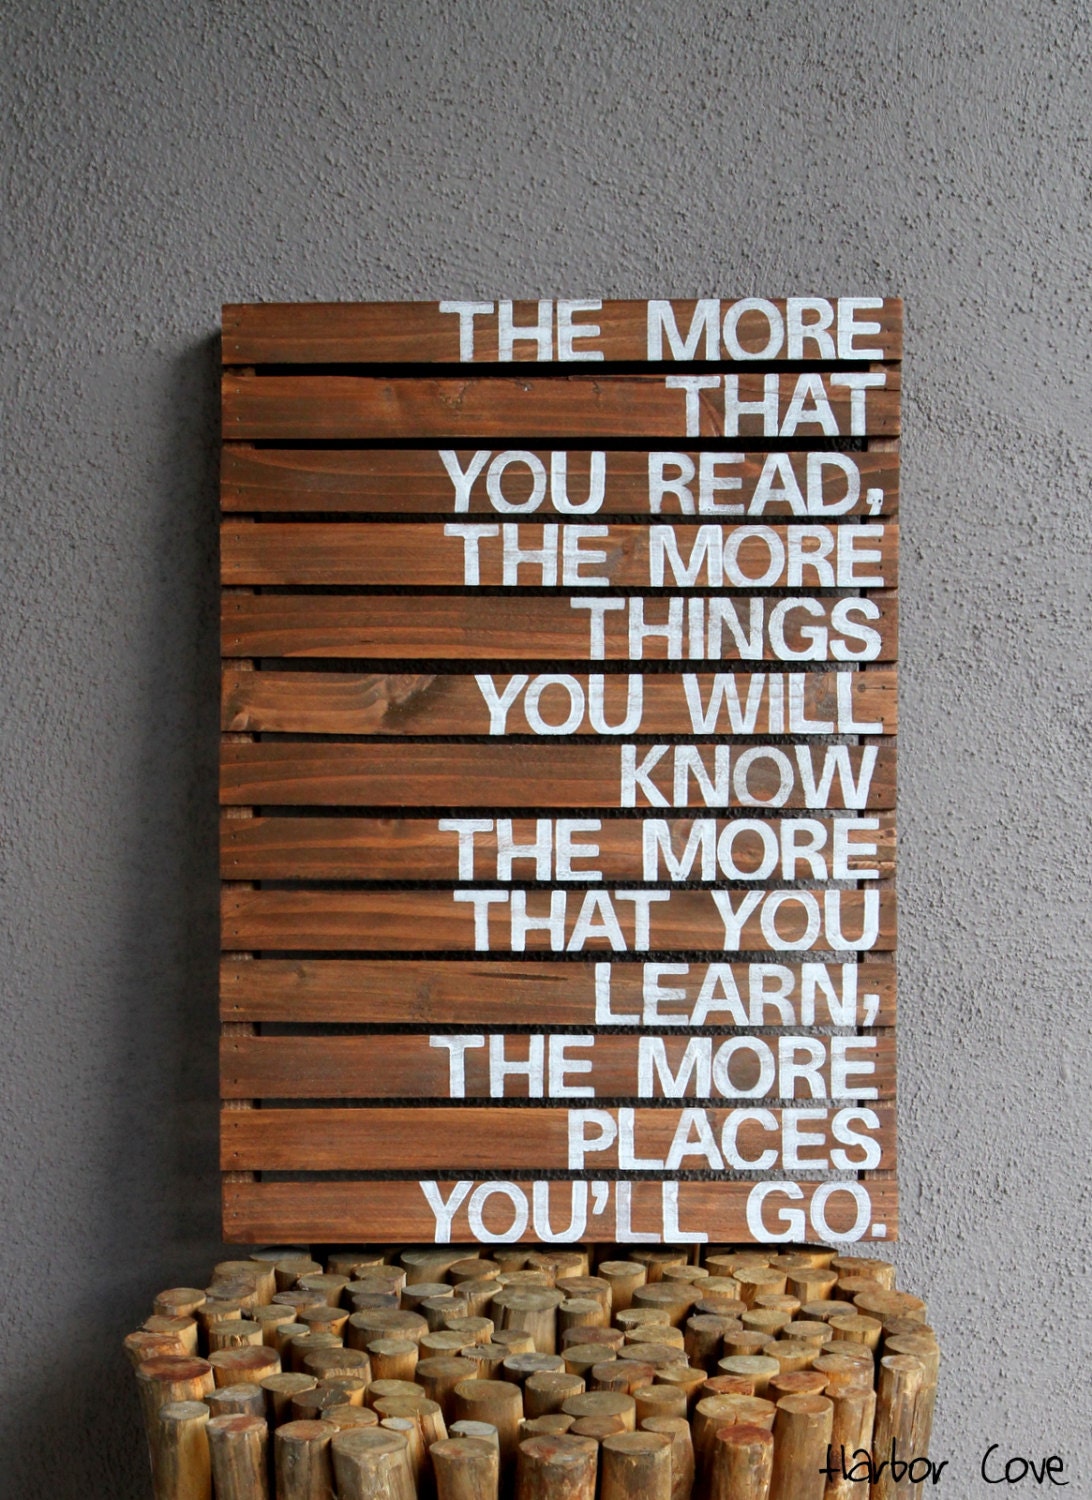 The More That You Read, The More Things You Will Know- Rustic Pallet Wood Sign - HarborCove